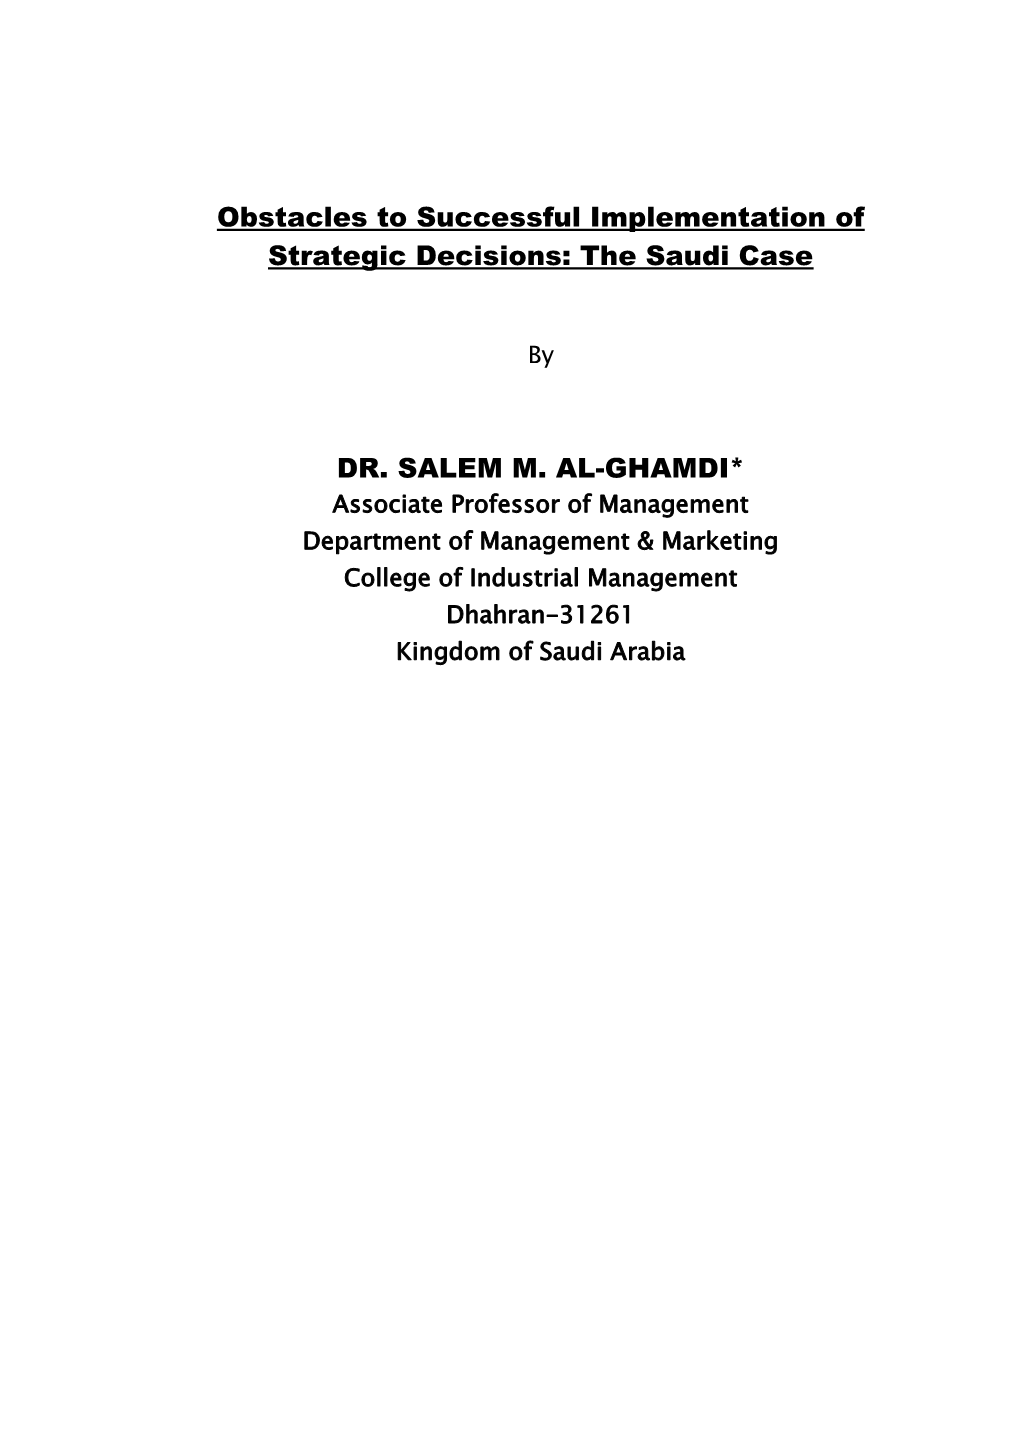 Obstacles to Successful Implementation of Strategic Decisions: the Saudi Case